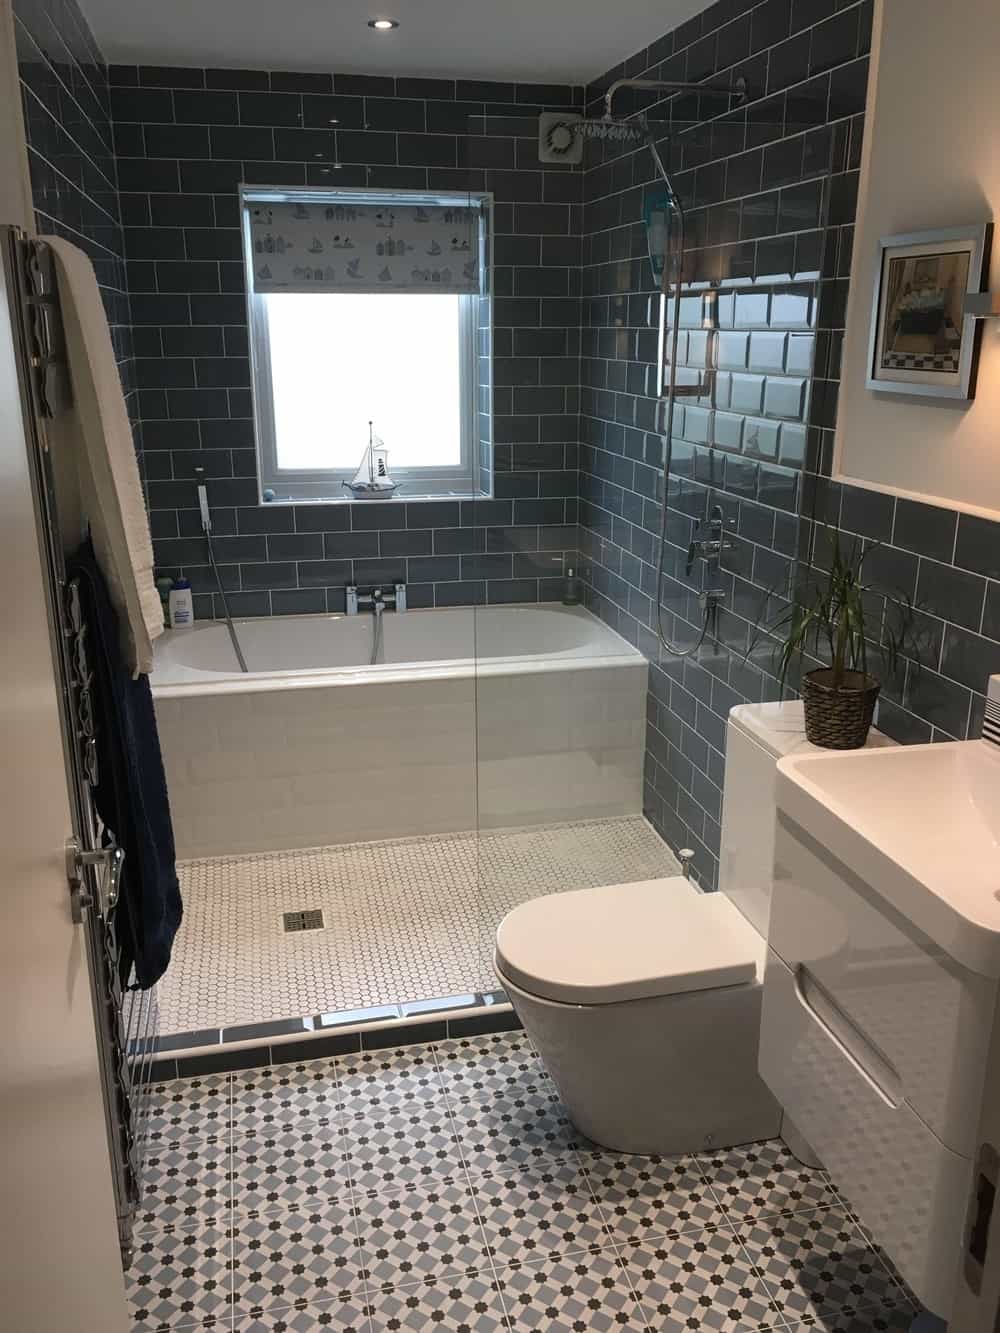 A Shower Area That Houses a Bathtub and a Shower Stall Both